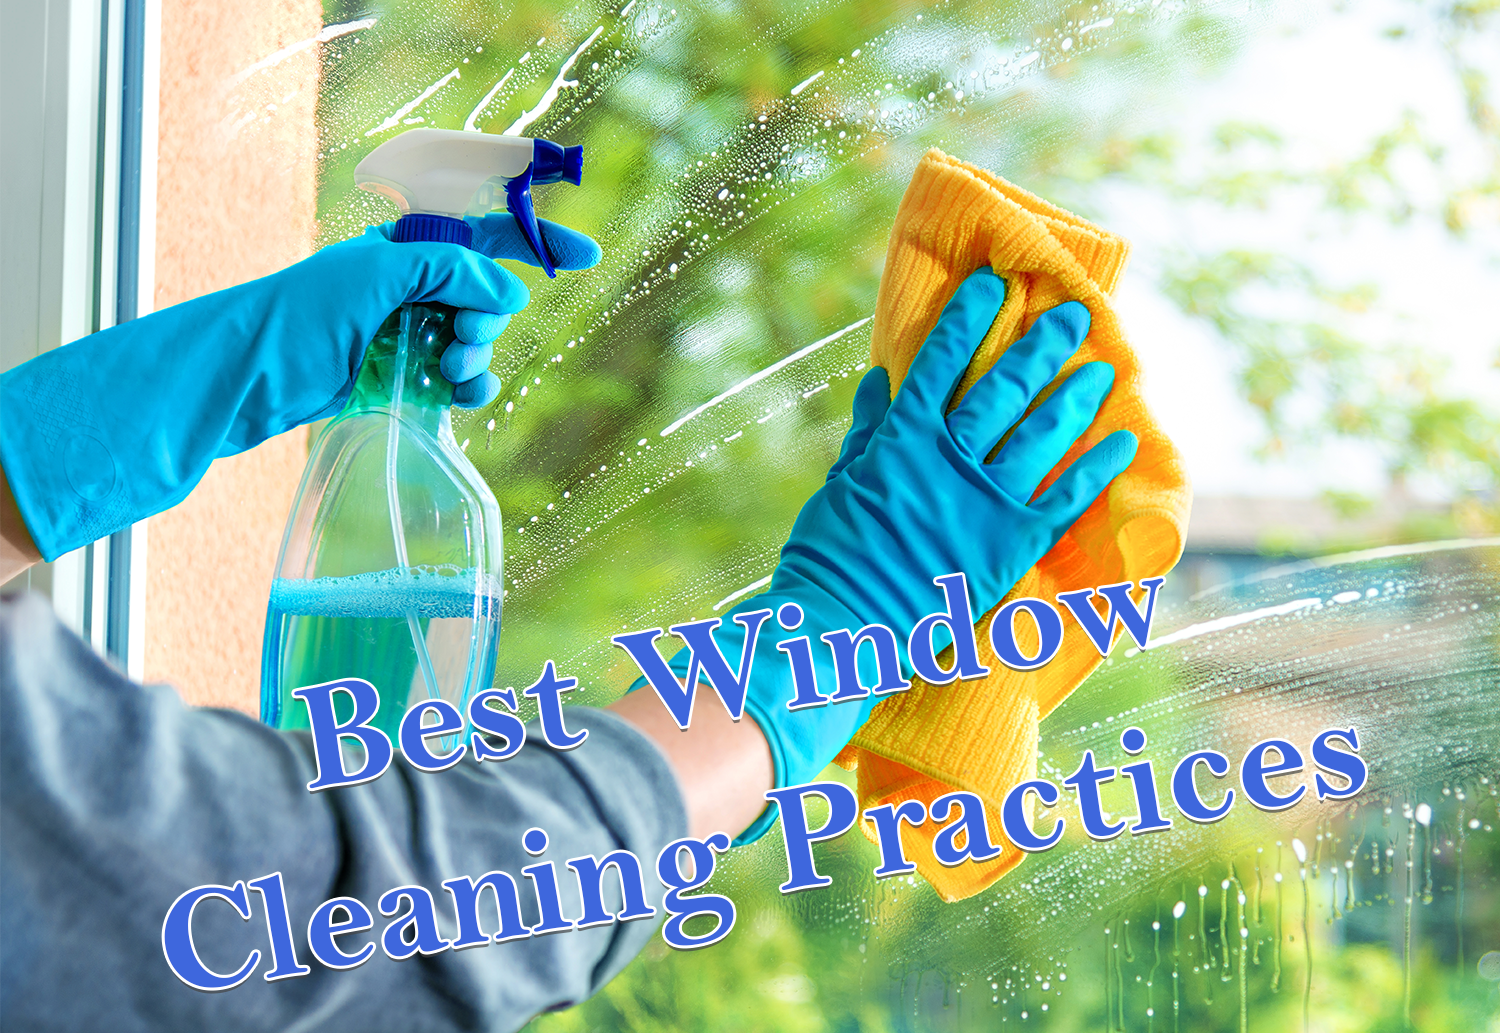 Best Window Cleaning Practices